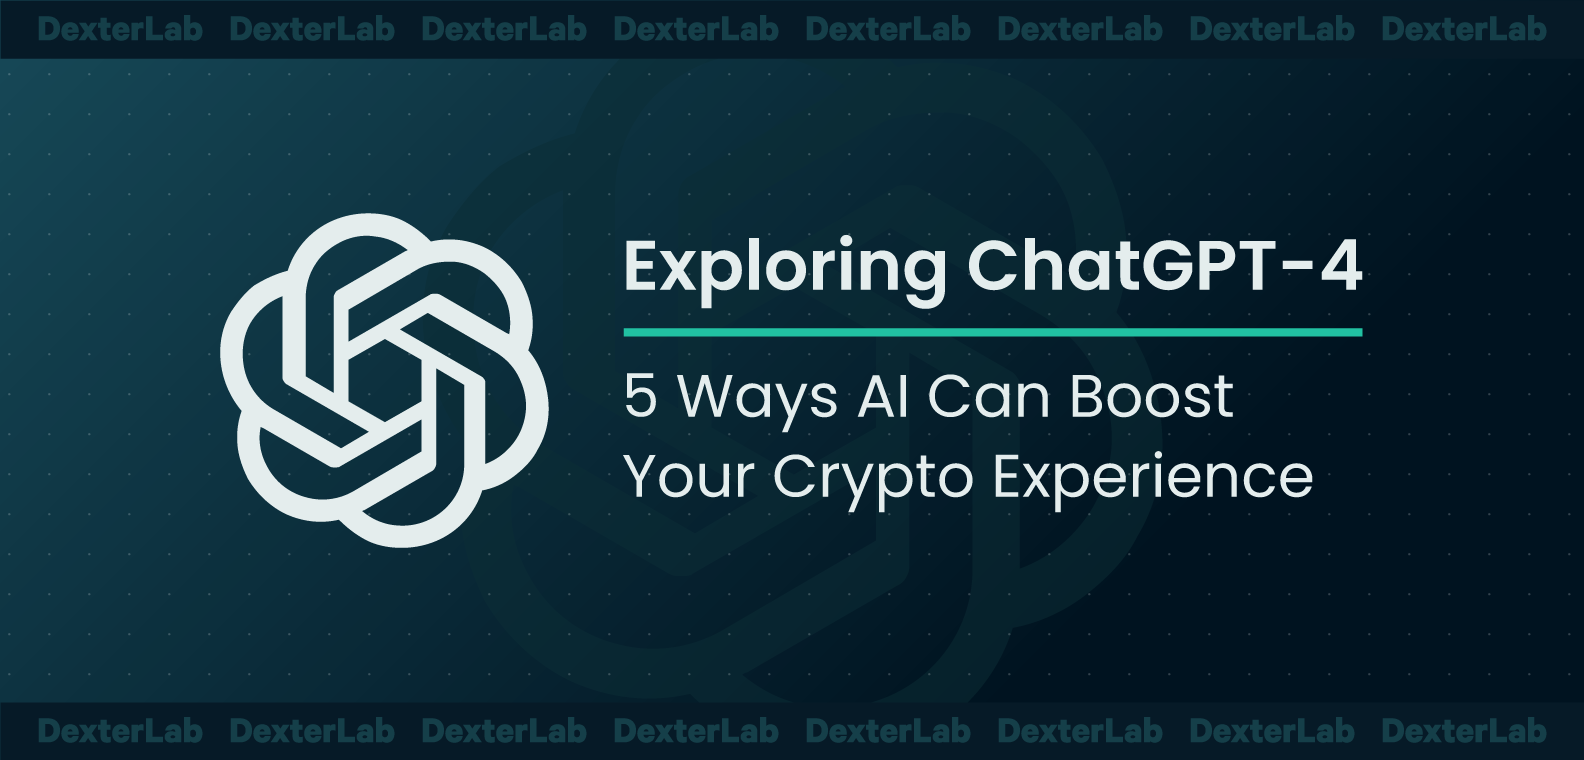 Exploring ChatGPT-4: 5 Ways AI Can Boost Your Crypto Experience